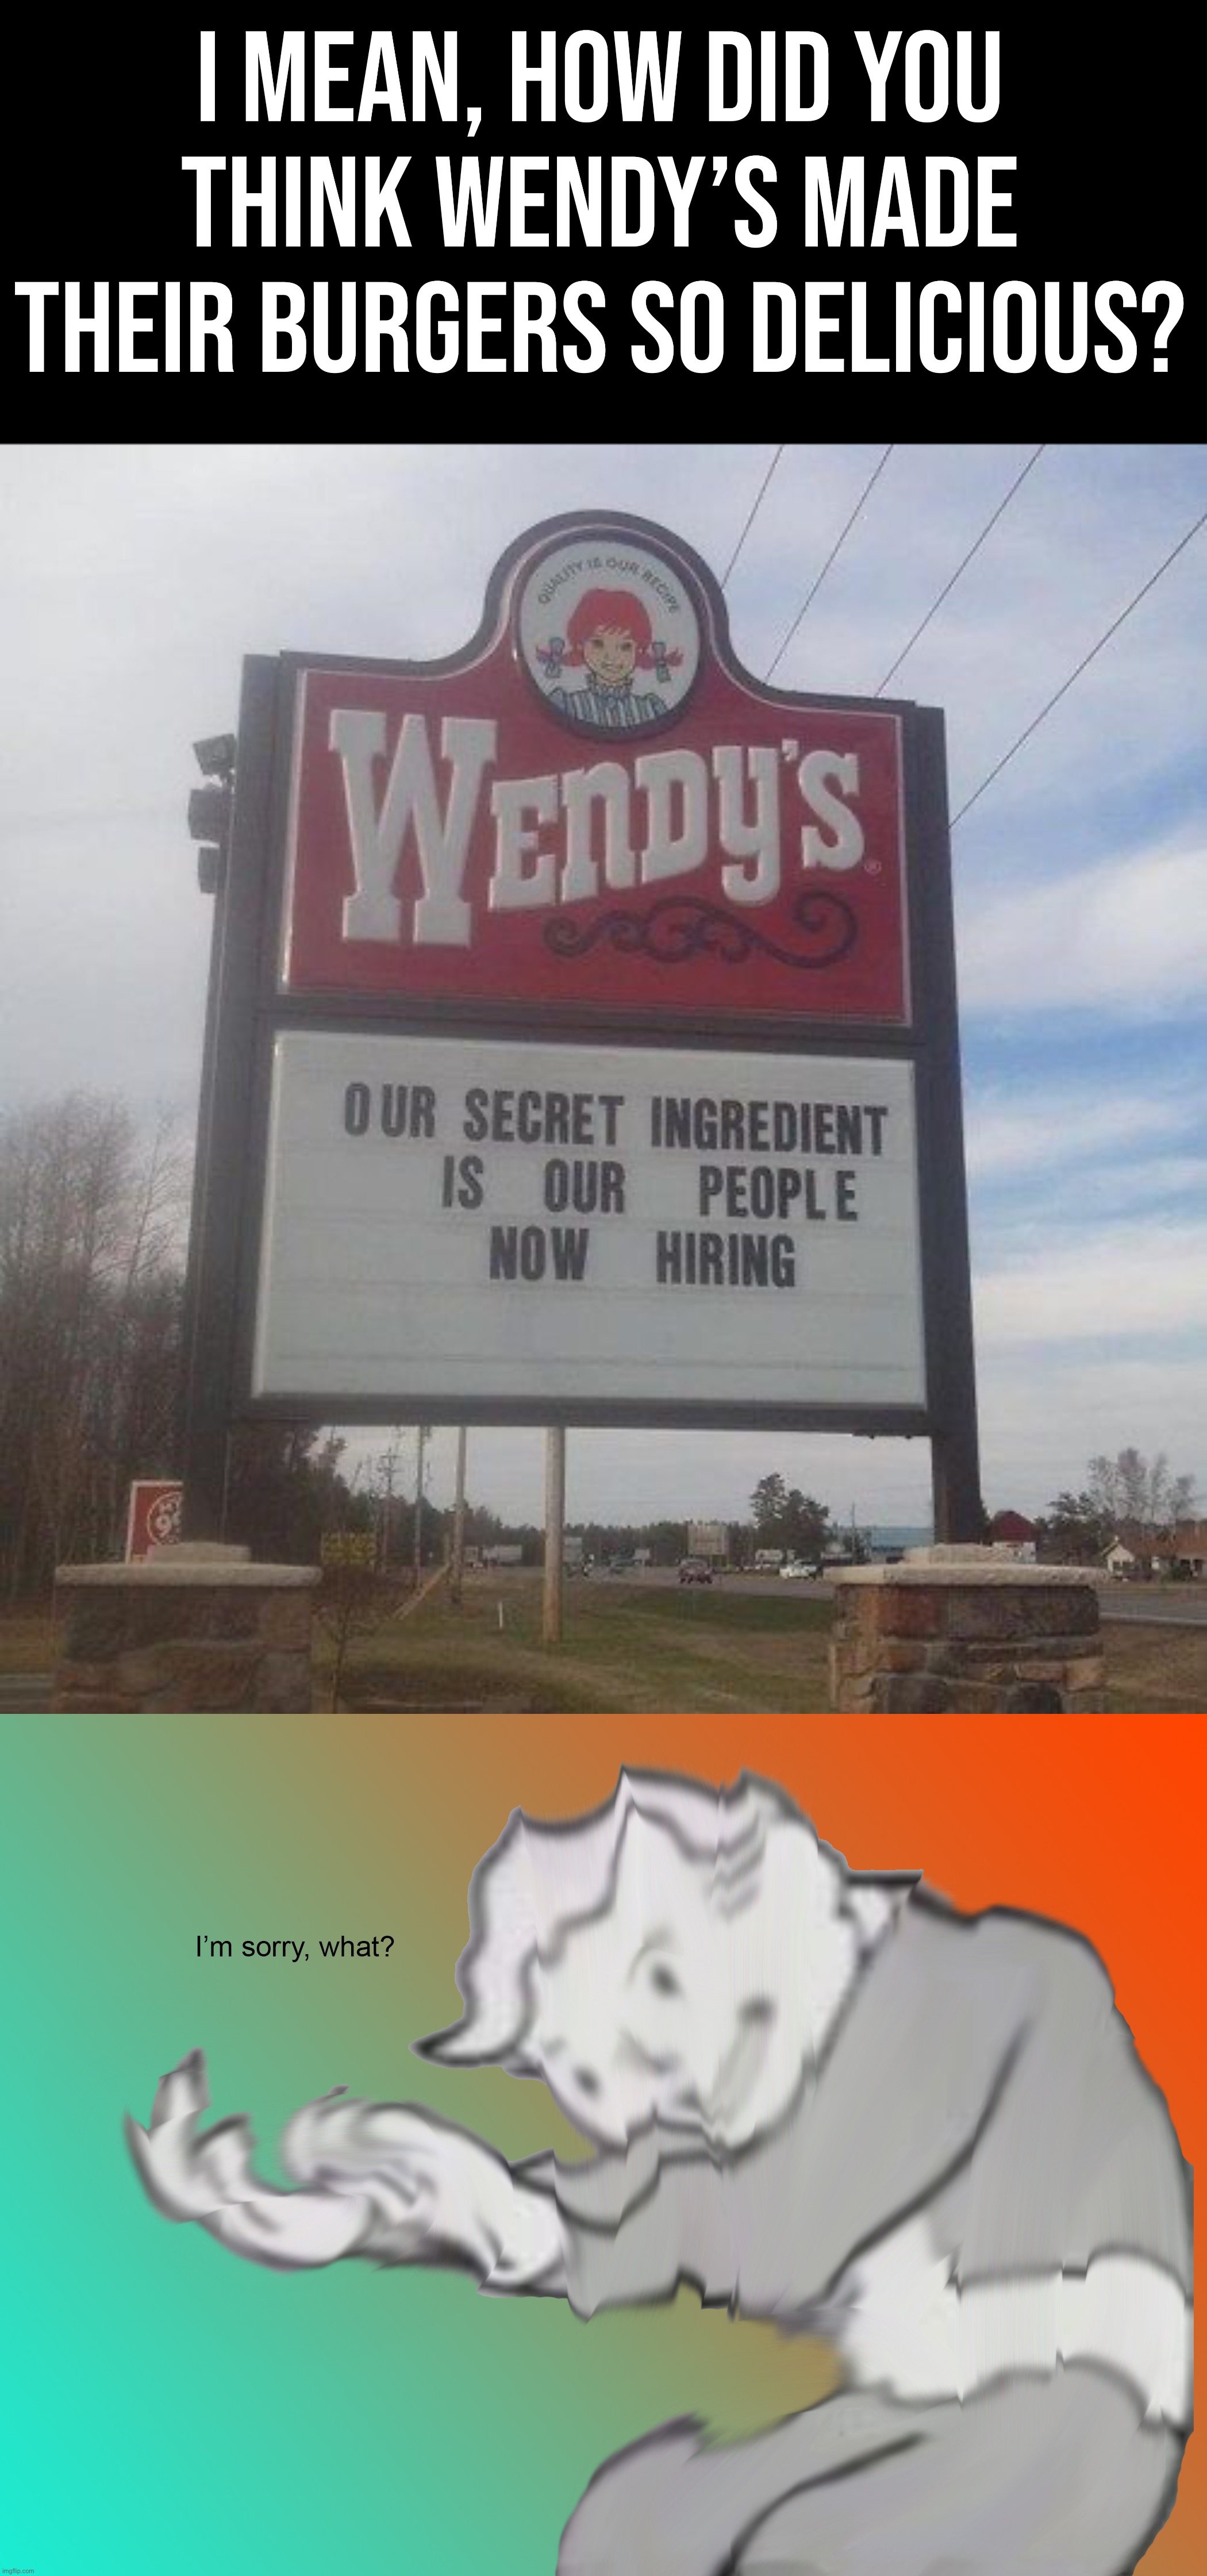 How did you think they made them so good? | I MEAN, HOW DID YOU THINK WENDY’S MADE THEIR BURGERS SO DELICIOUS? | image tagged in i'm sorry what,memes,funny,wendy's,burger,hold up | made w/ Imgflip meme maker